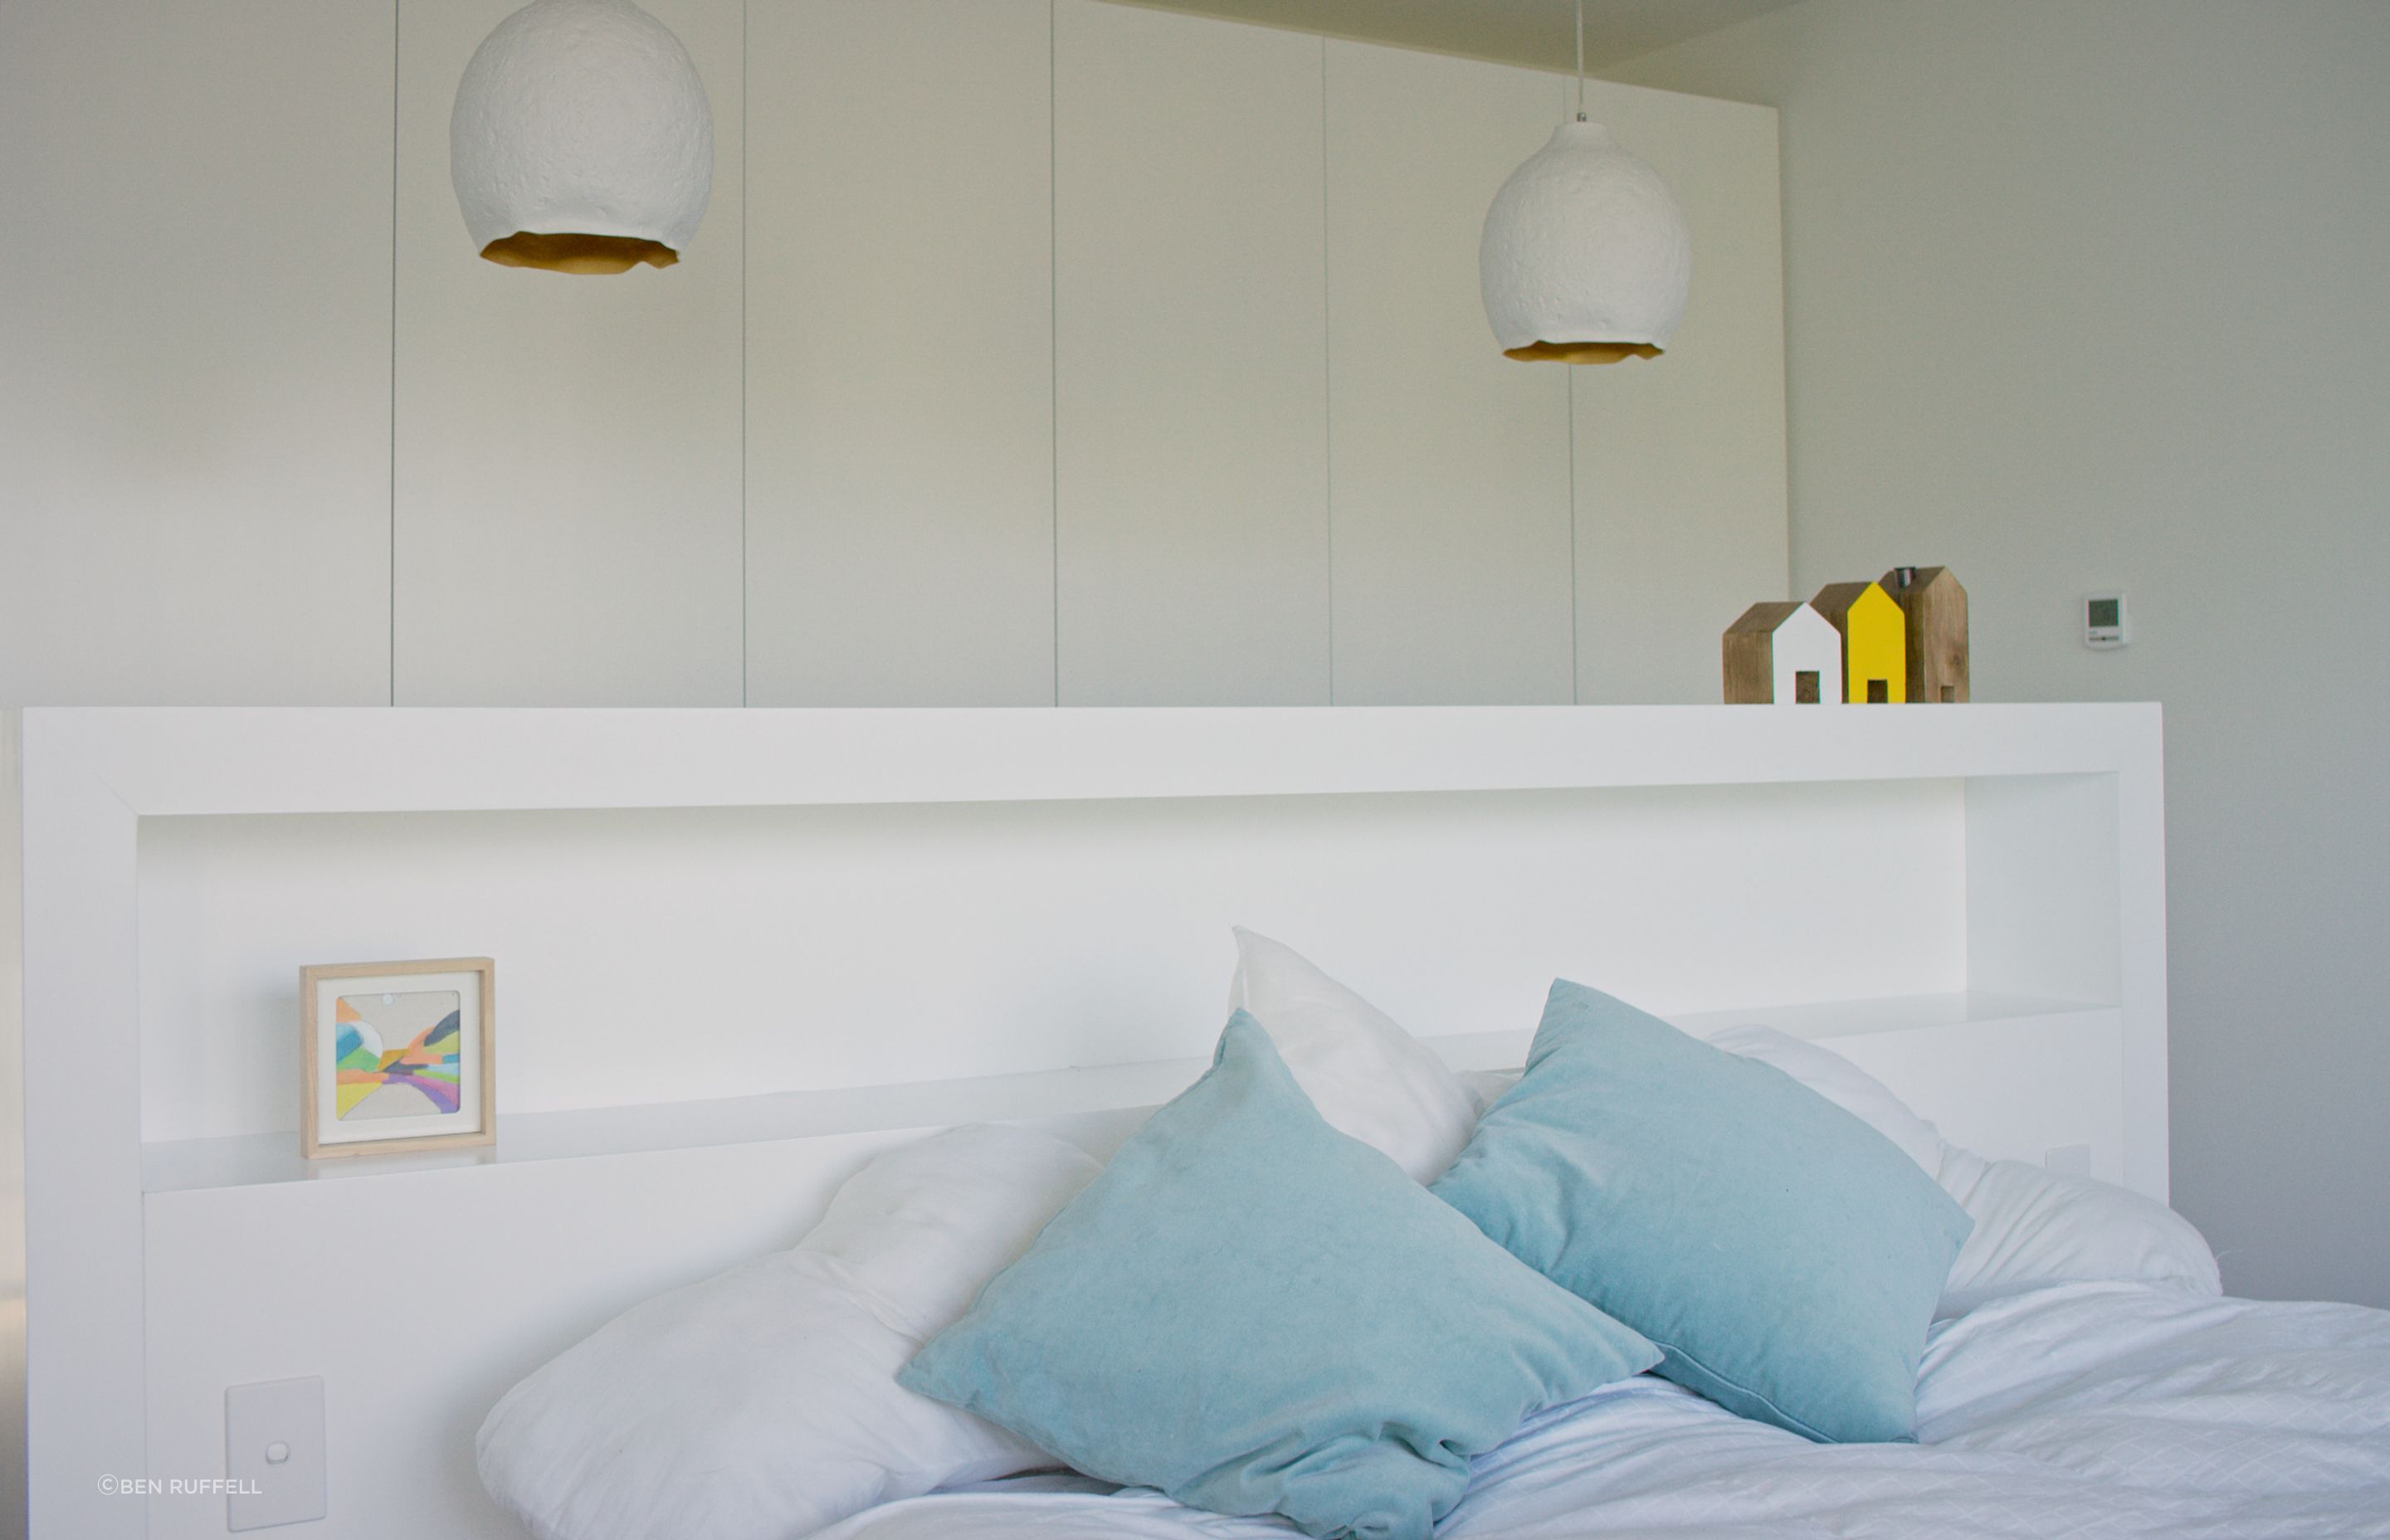 The built-in headboard provides simple storage and acts as a room divider between the bed and the wardrobes.